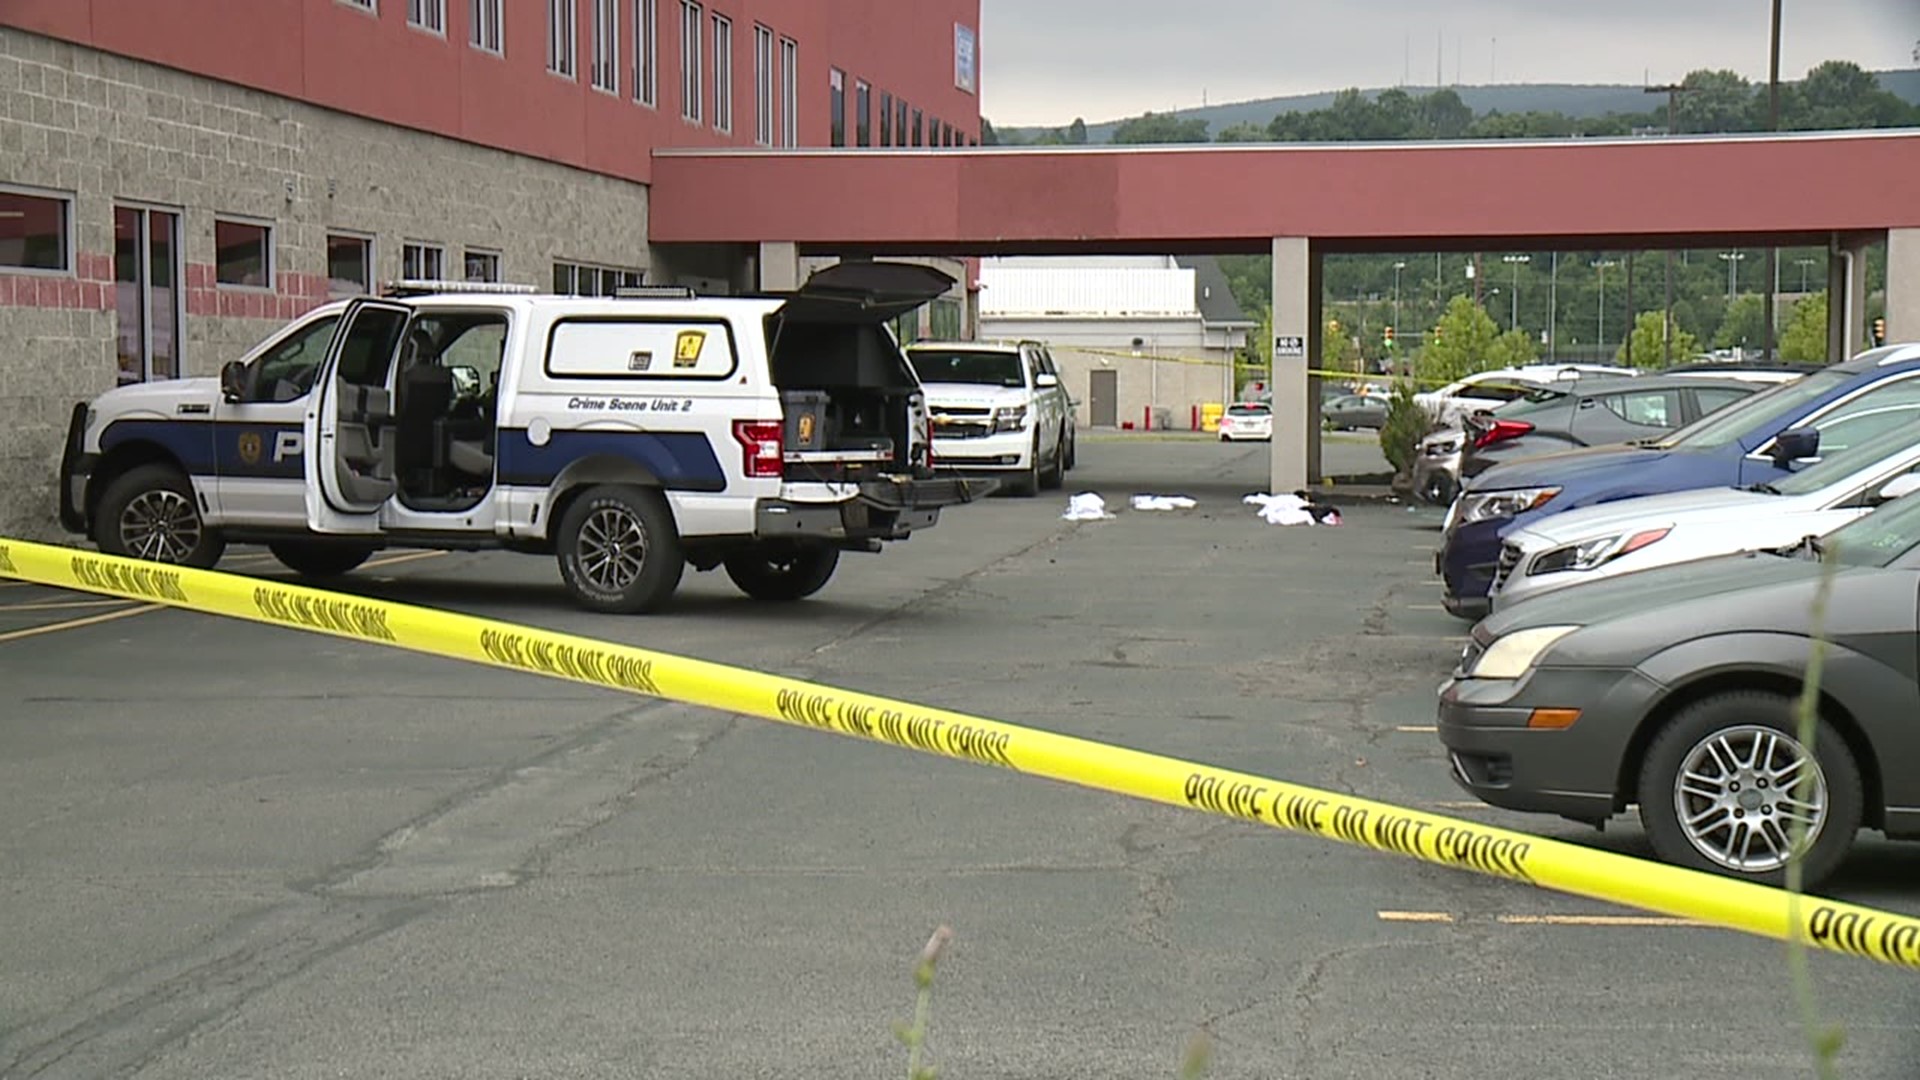 The Scranton School District plans enhanced security because that deadly stabbing happened not far from Scranton High School.